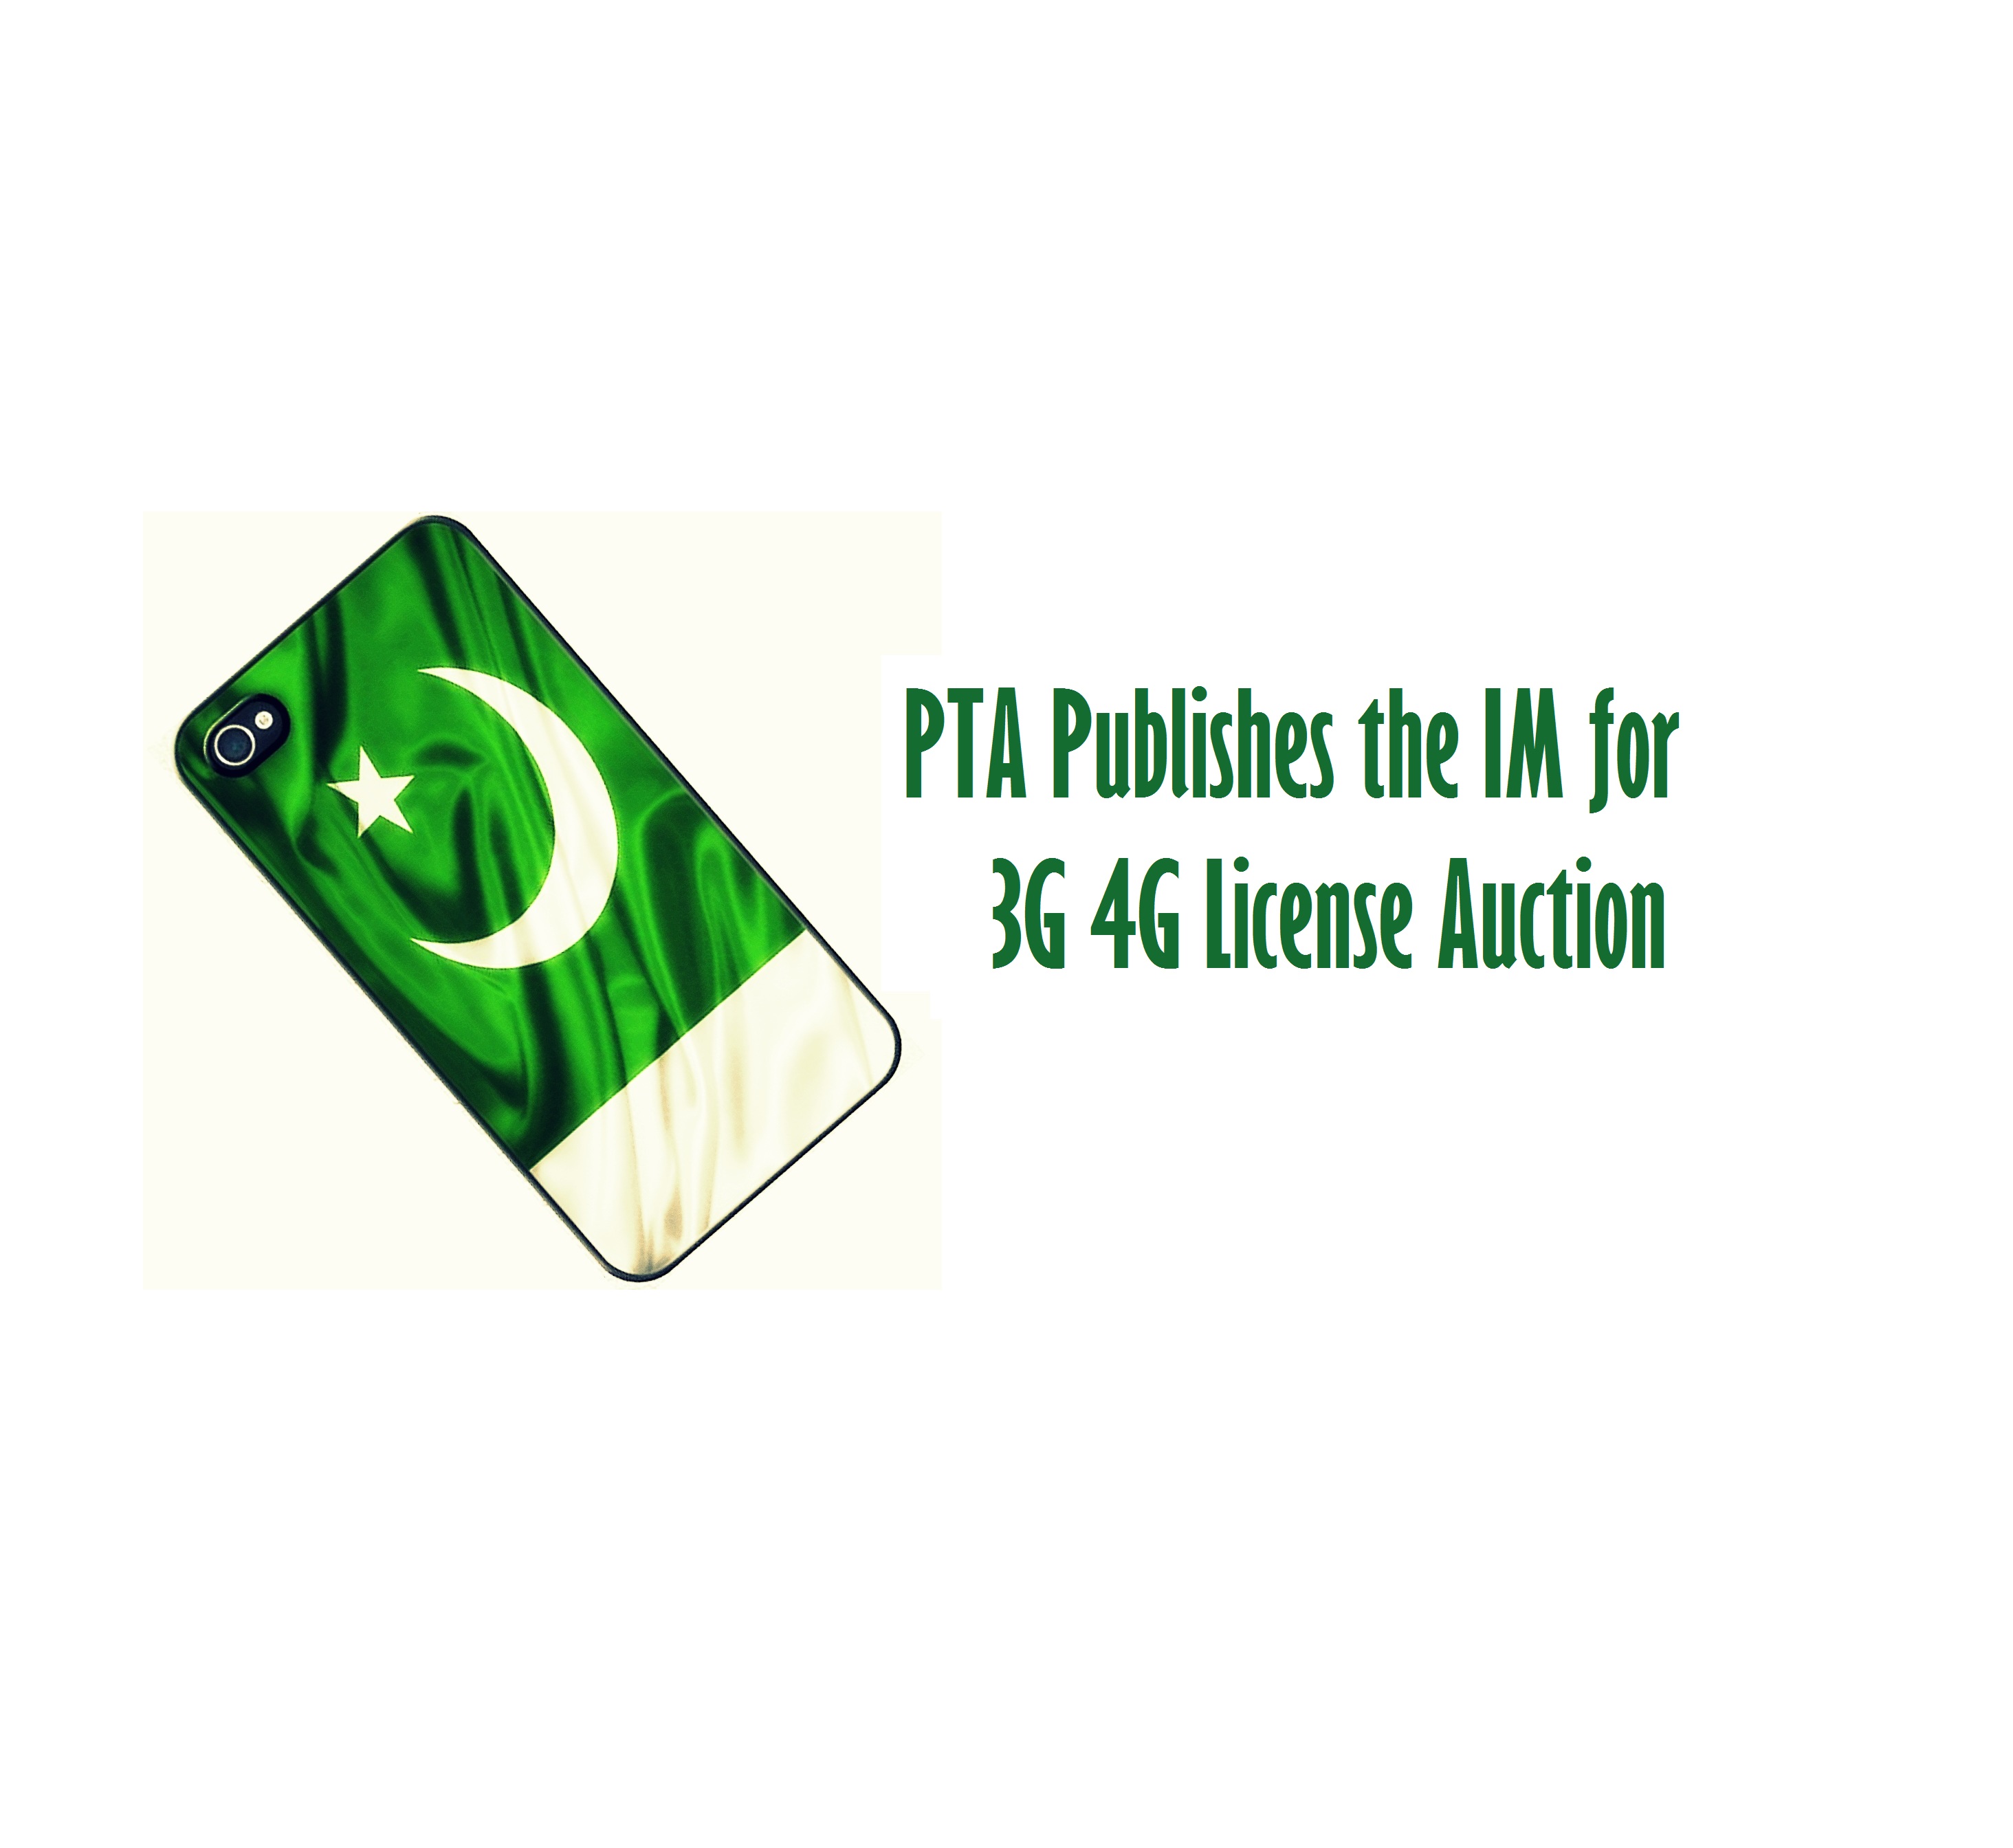 PTA Publishes the IM for 3G 4G License Auction